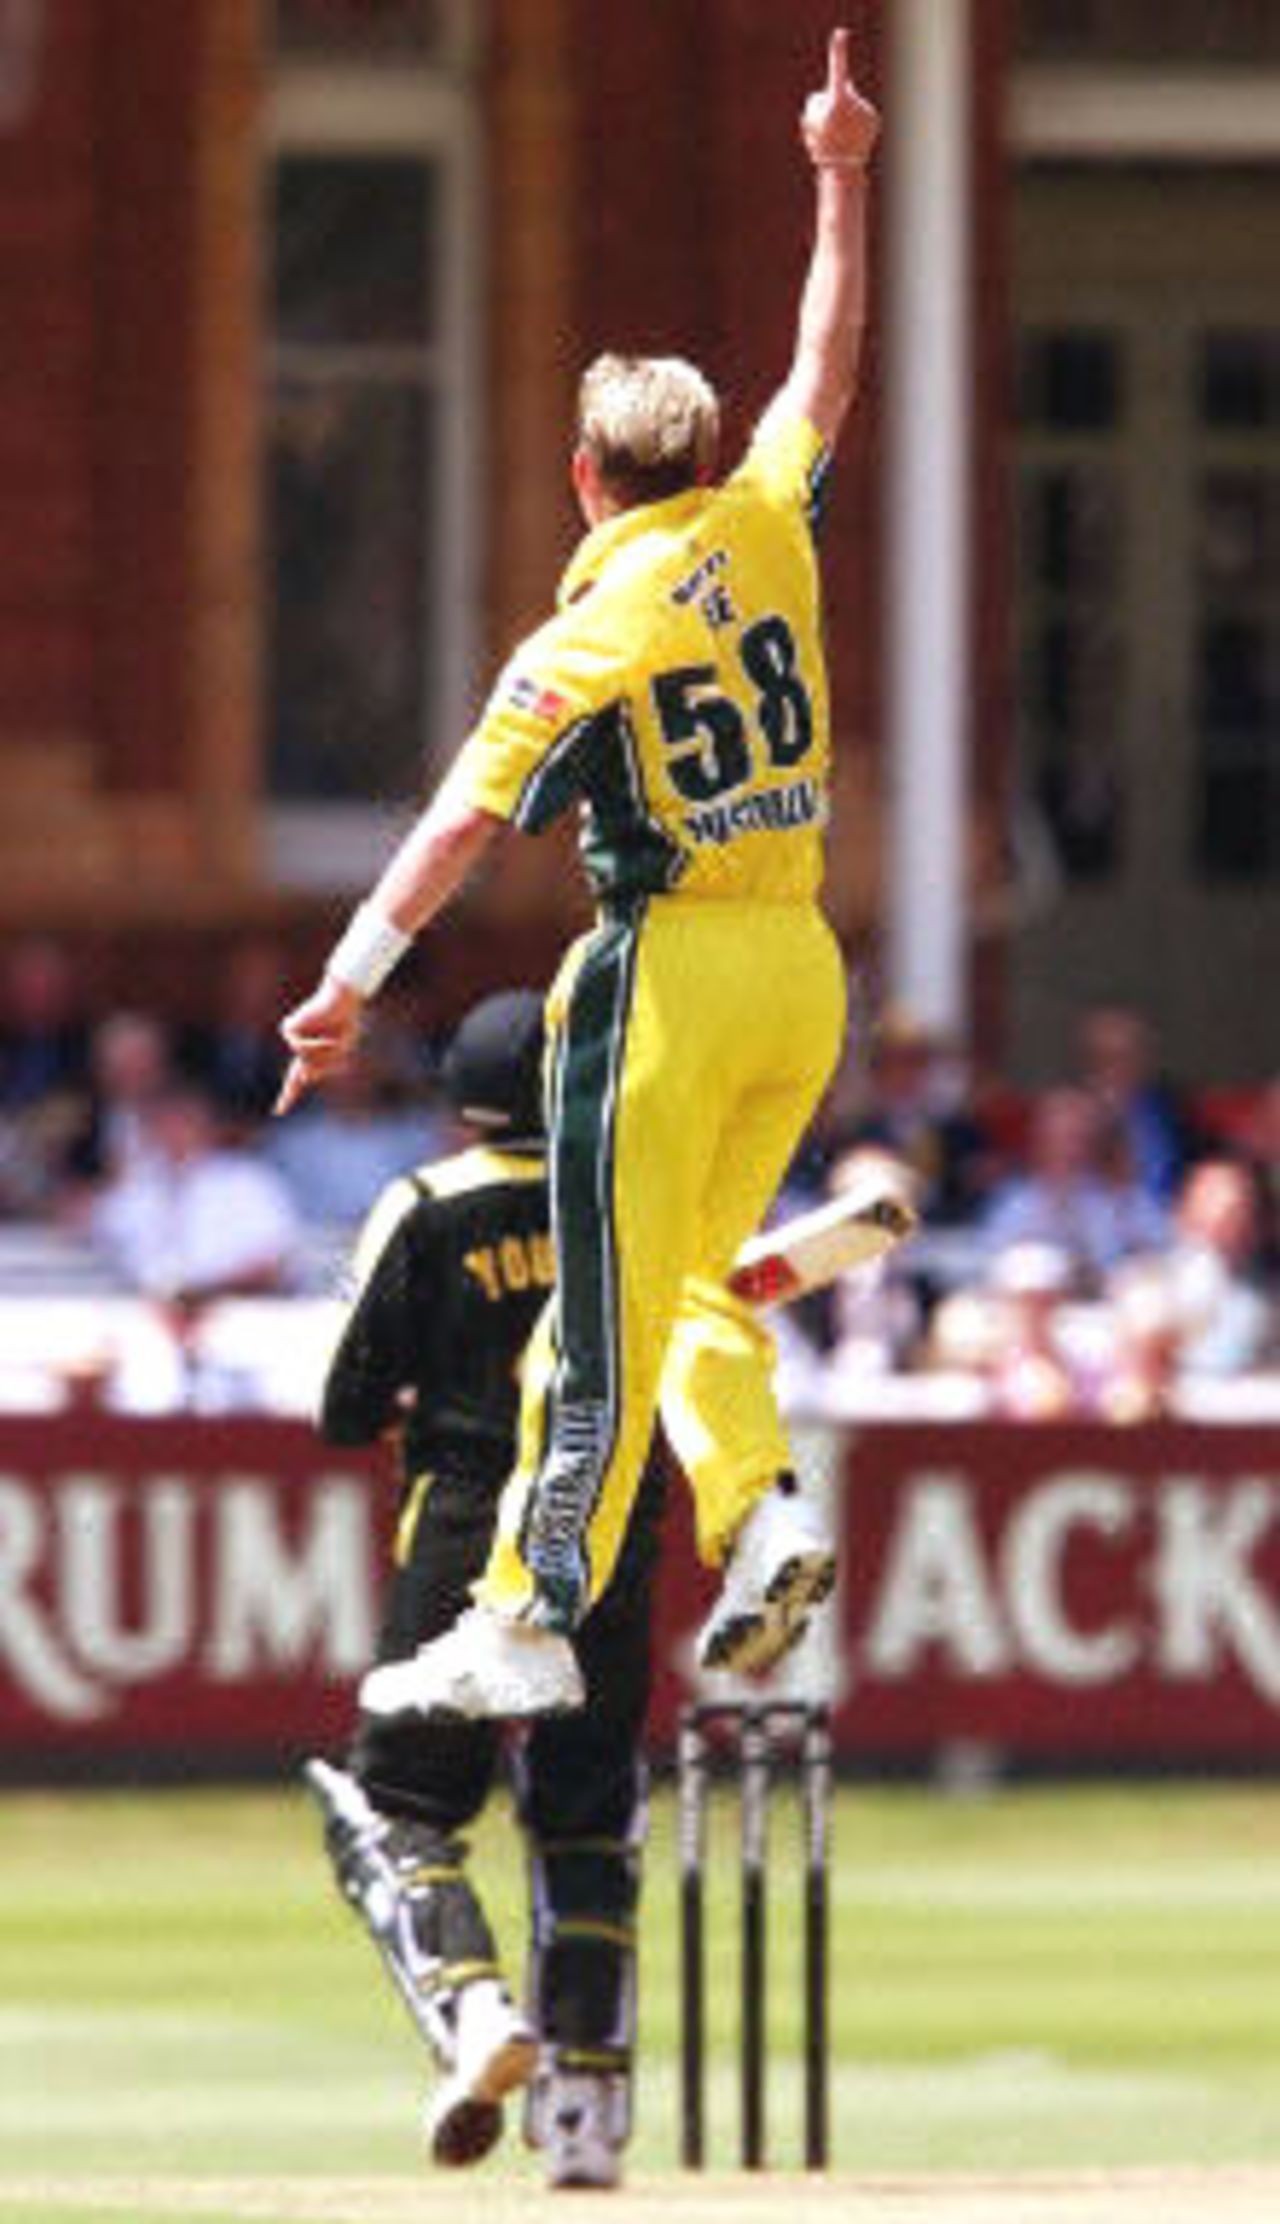 Brett Lee leaps high in the air and gives Younis Khan a send-off, final ODI at Lords, 23 June 2001.